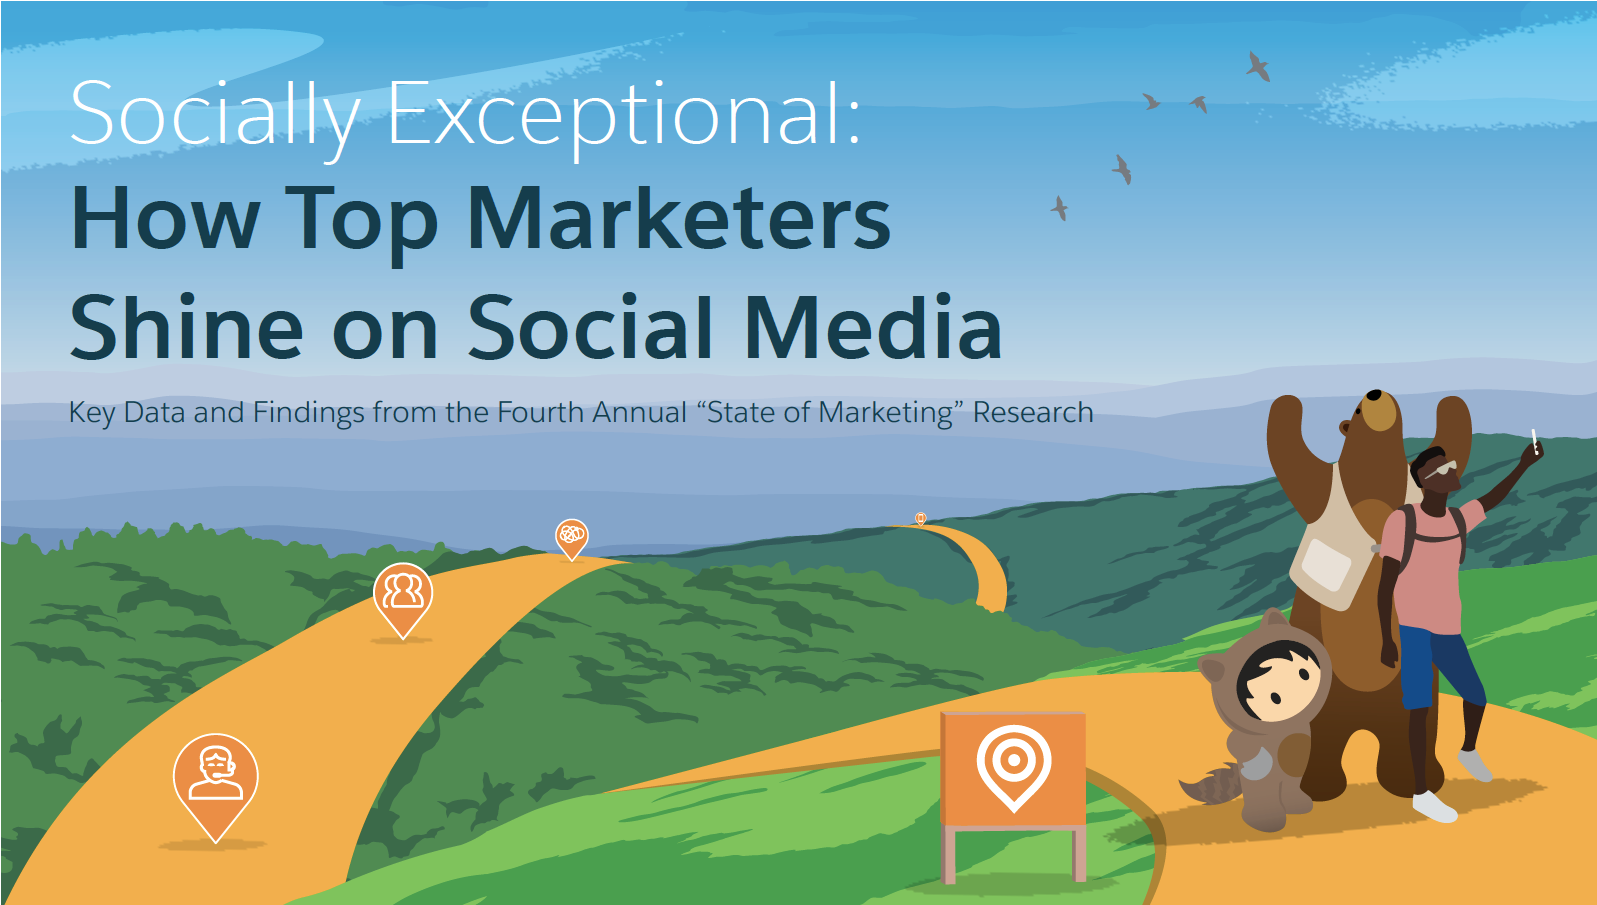 New Data from Salesforce: Top Brands Align Social Marketing and Customer Service